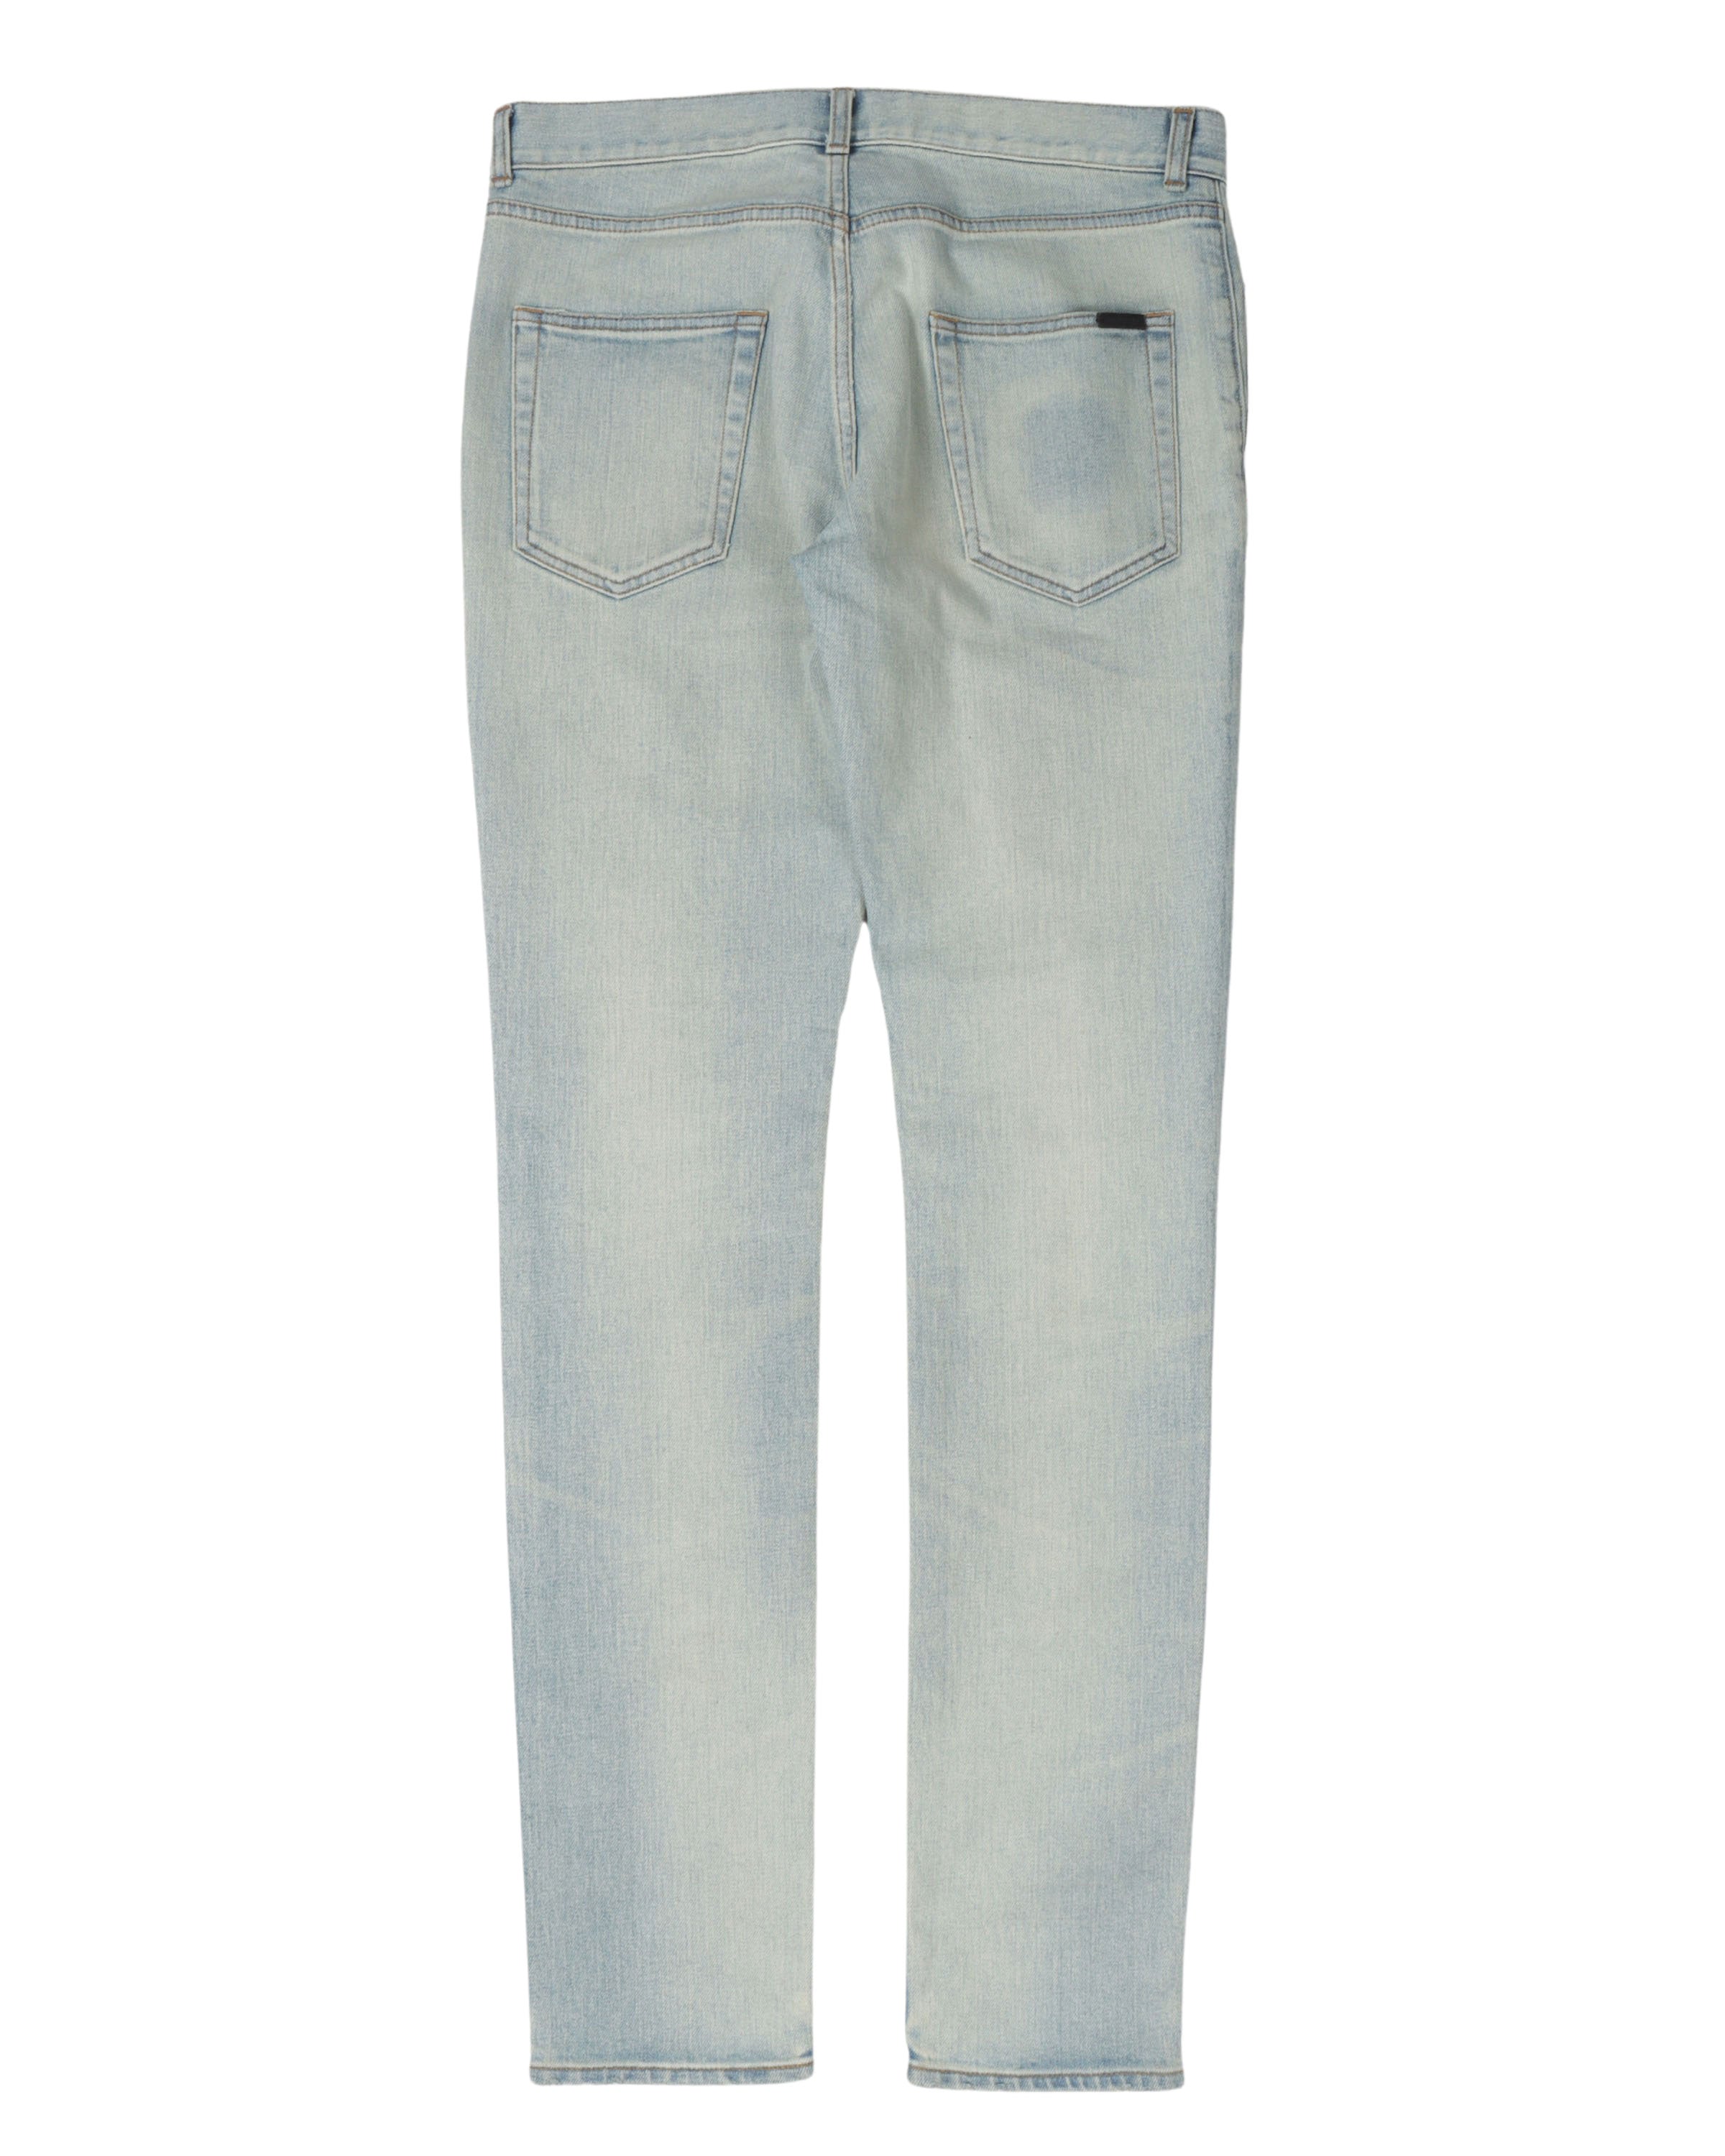 Light Wash Distressed Jeans